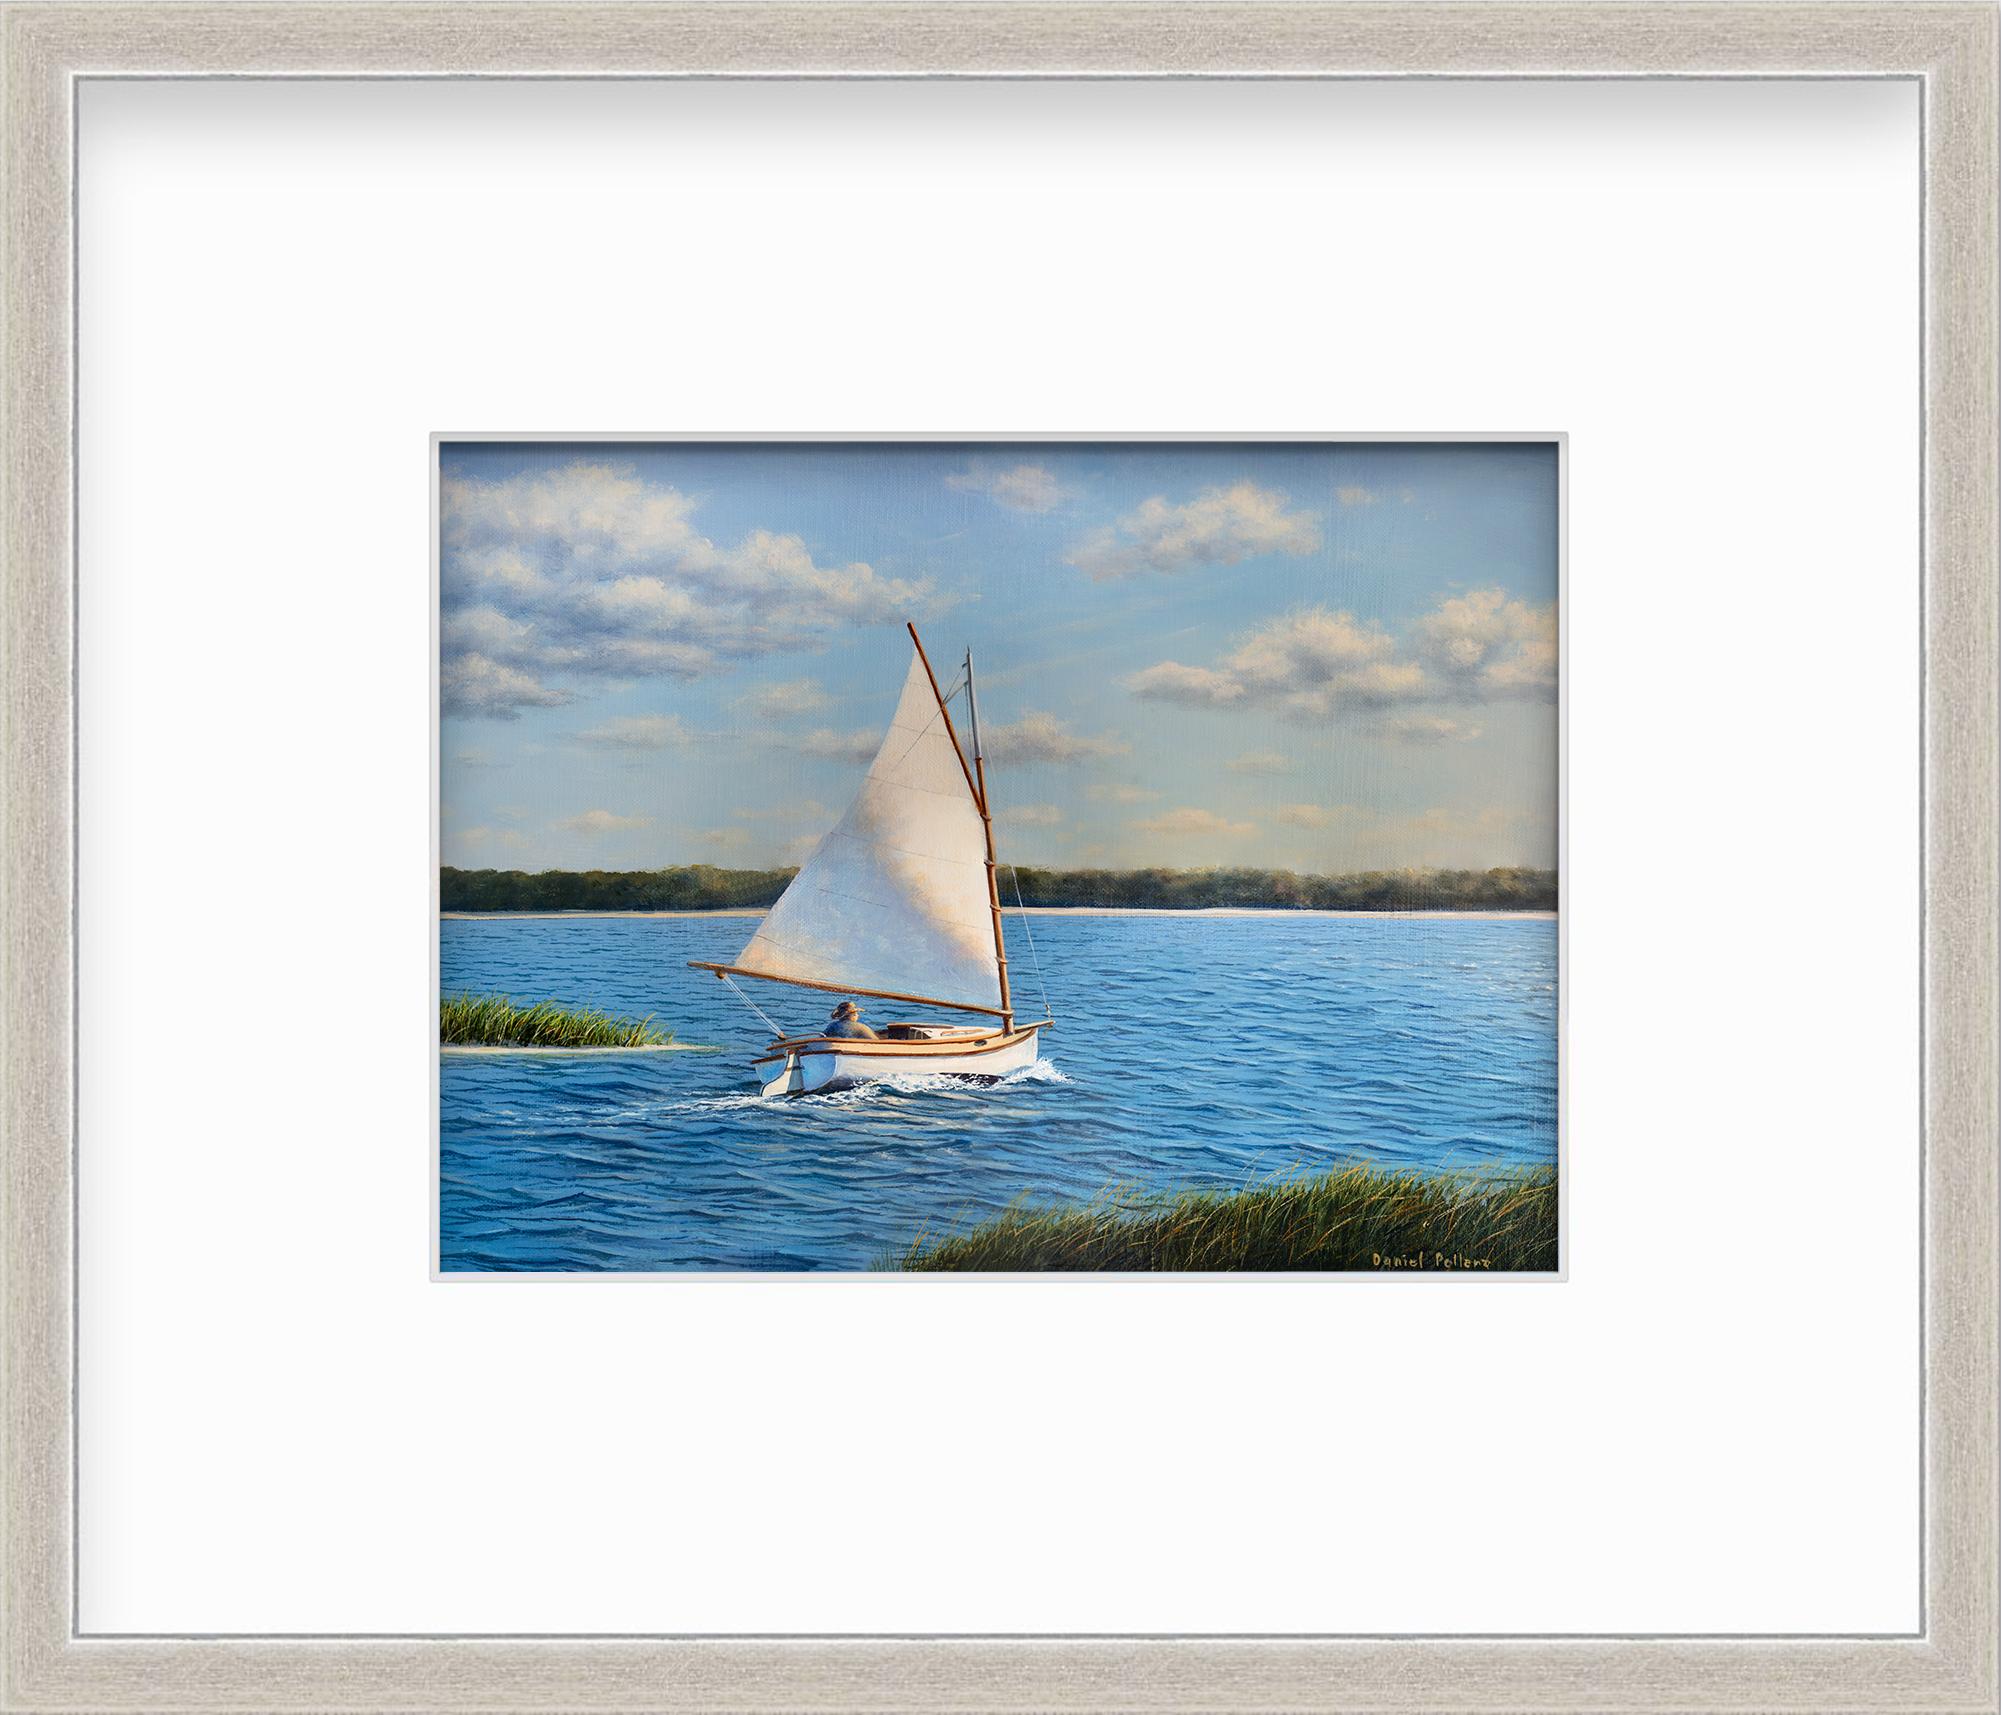 Daniel Pollera Landscape Print - "Sailing Out to the Bay, " Framed Limited Edition Print, 12" x 18"